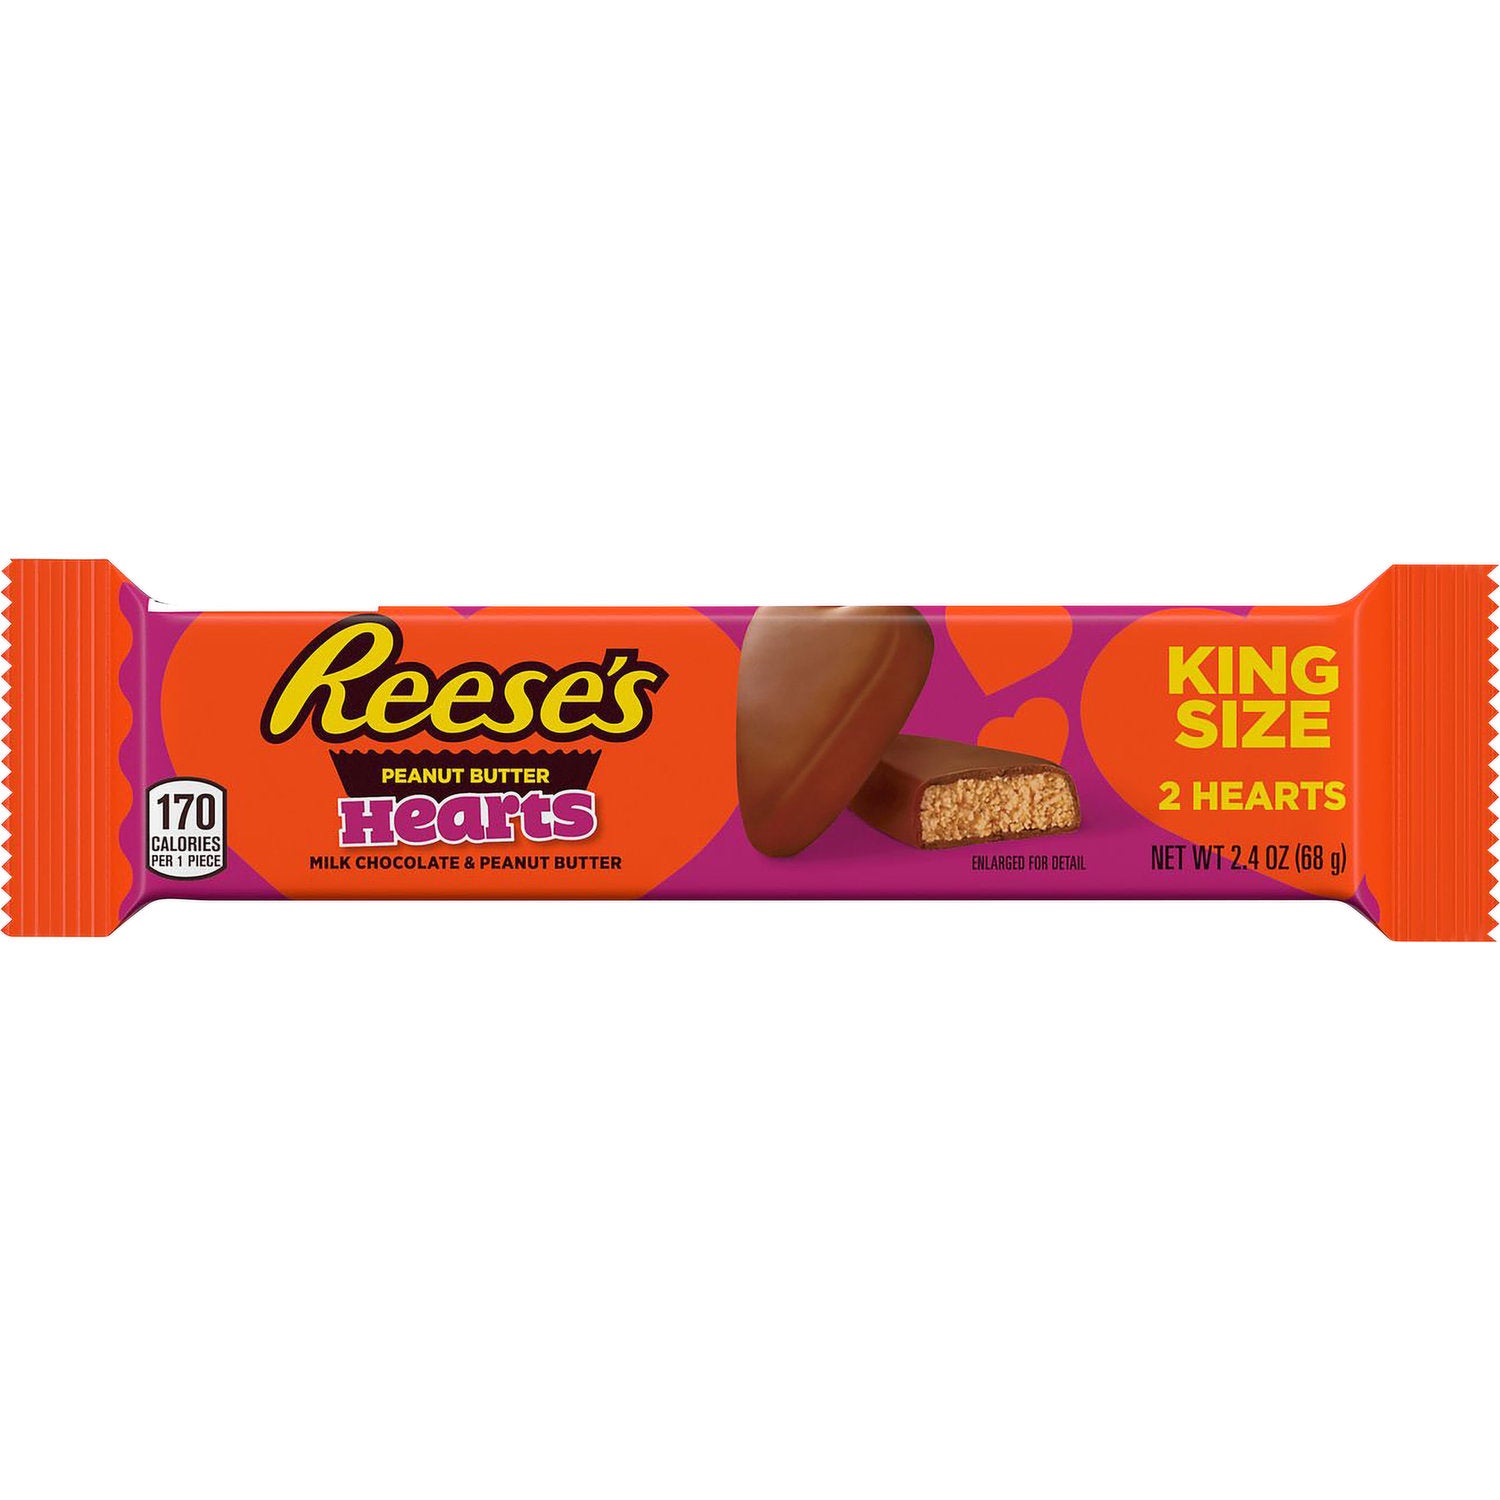 Reese's Peanut Butter Valentine's Day Hearts King Size